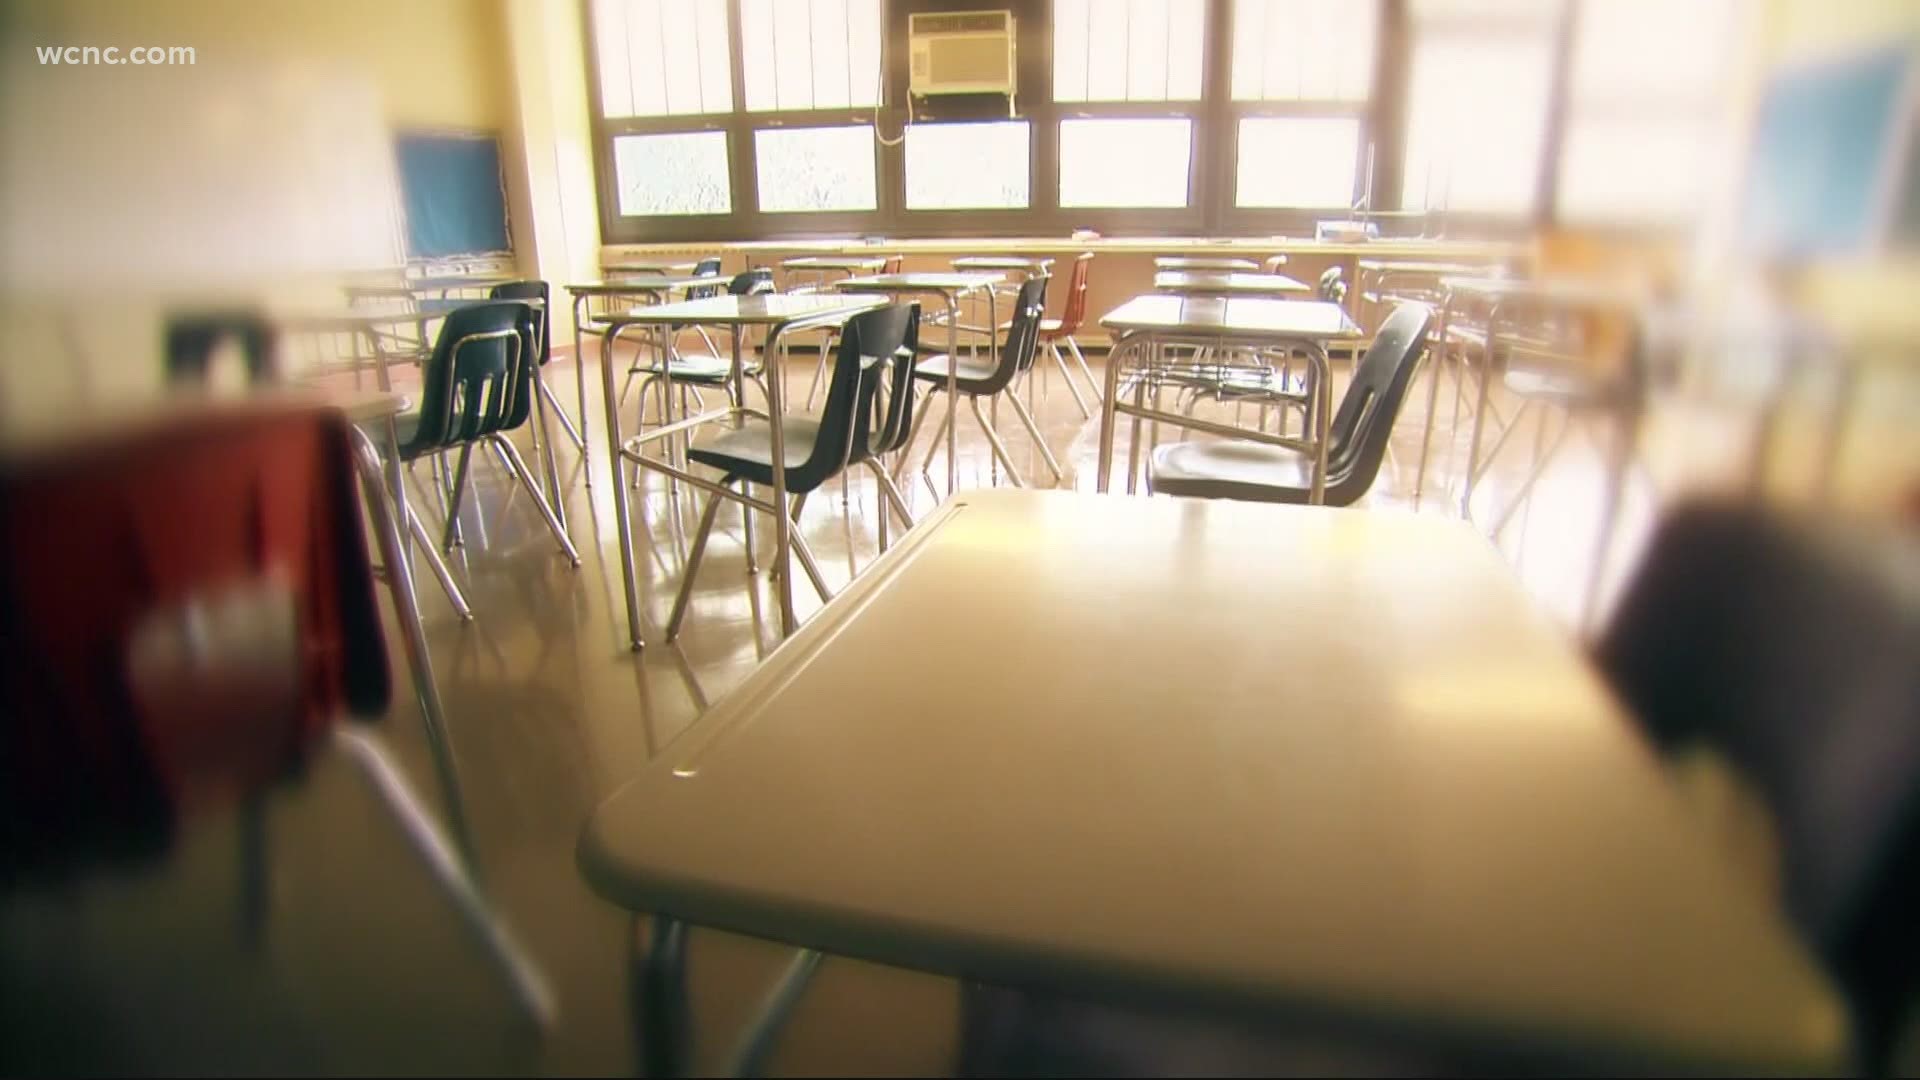 Charlotte-Mecklenburg Schools leaders are expected to discuss plans on how they can get students back for in-person learning.